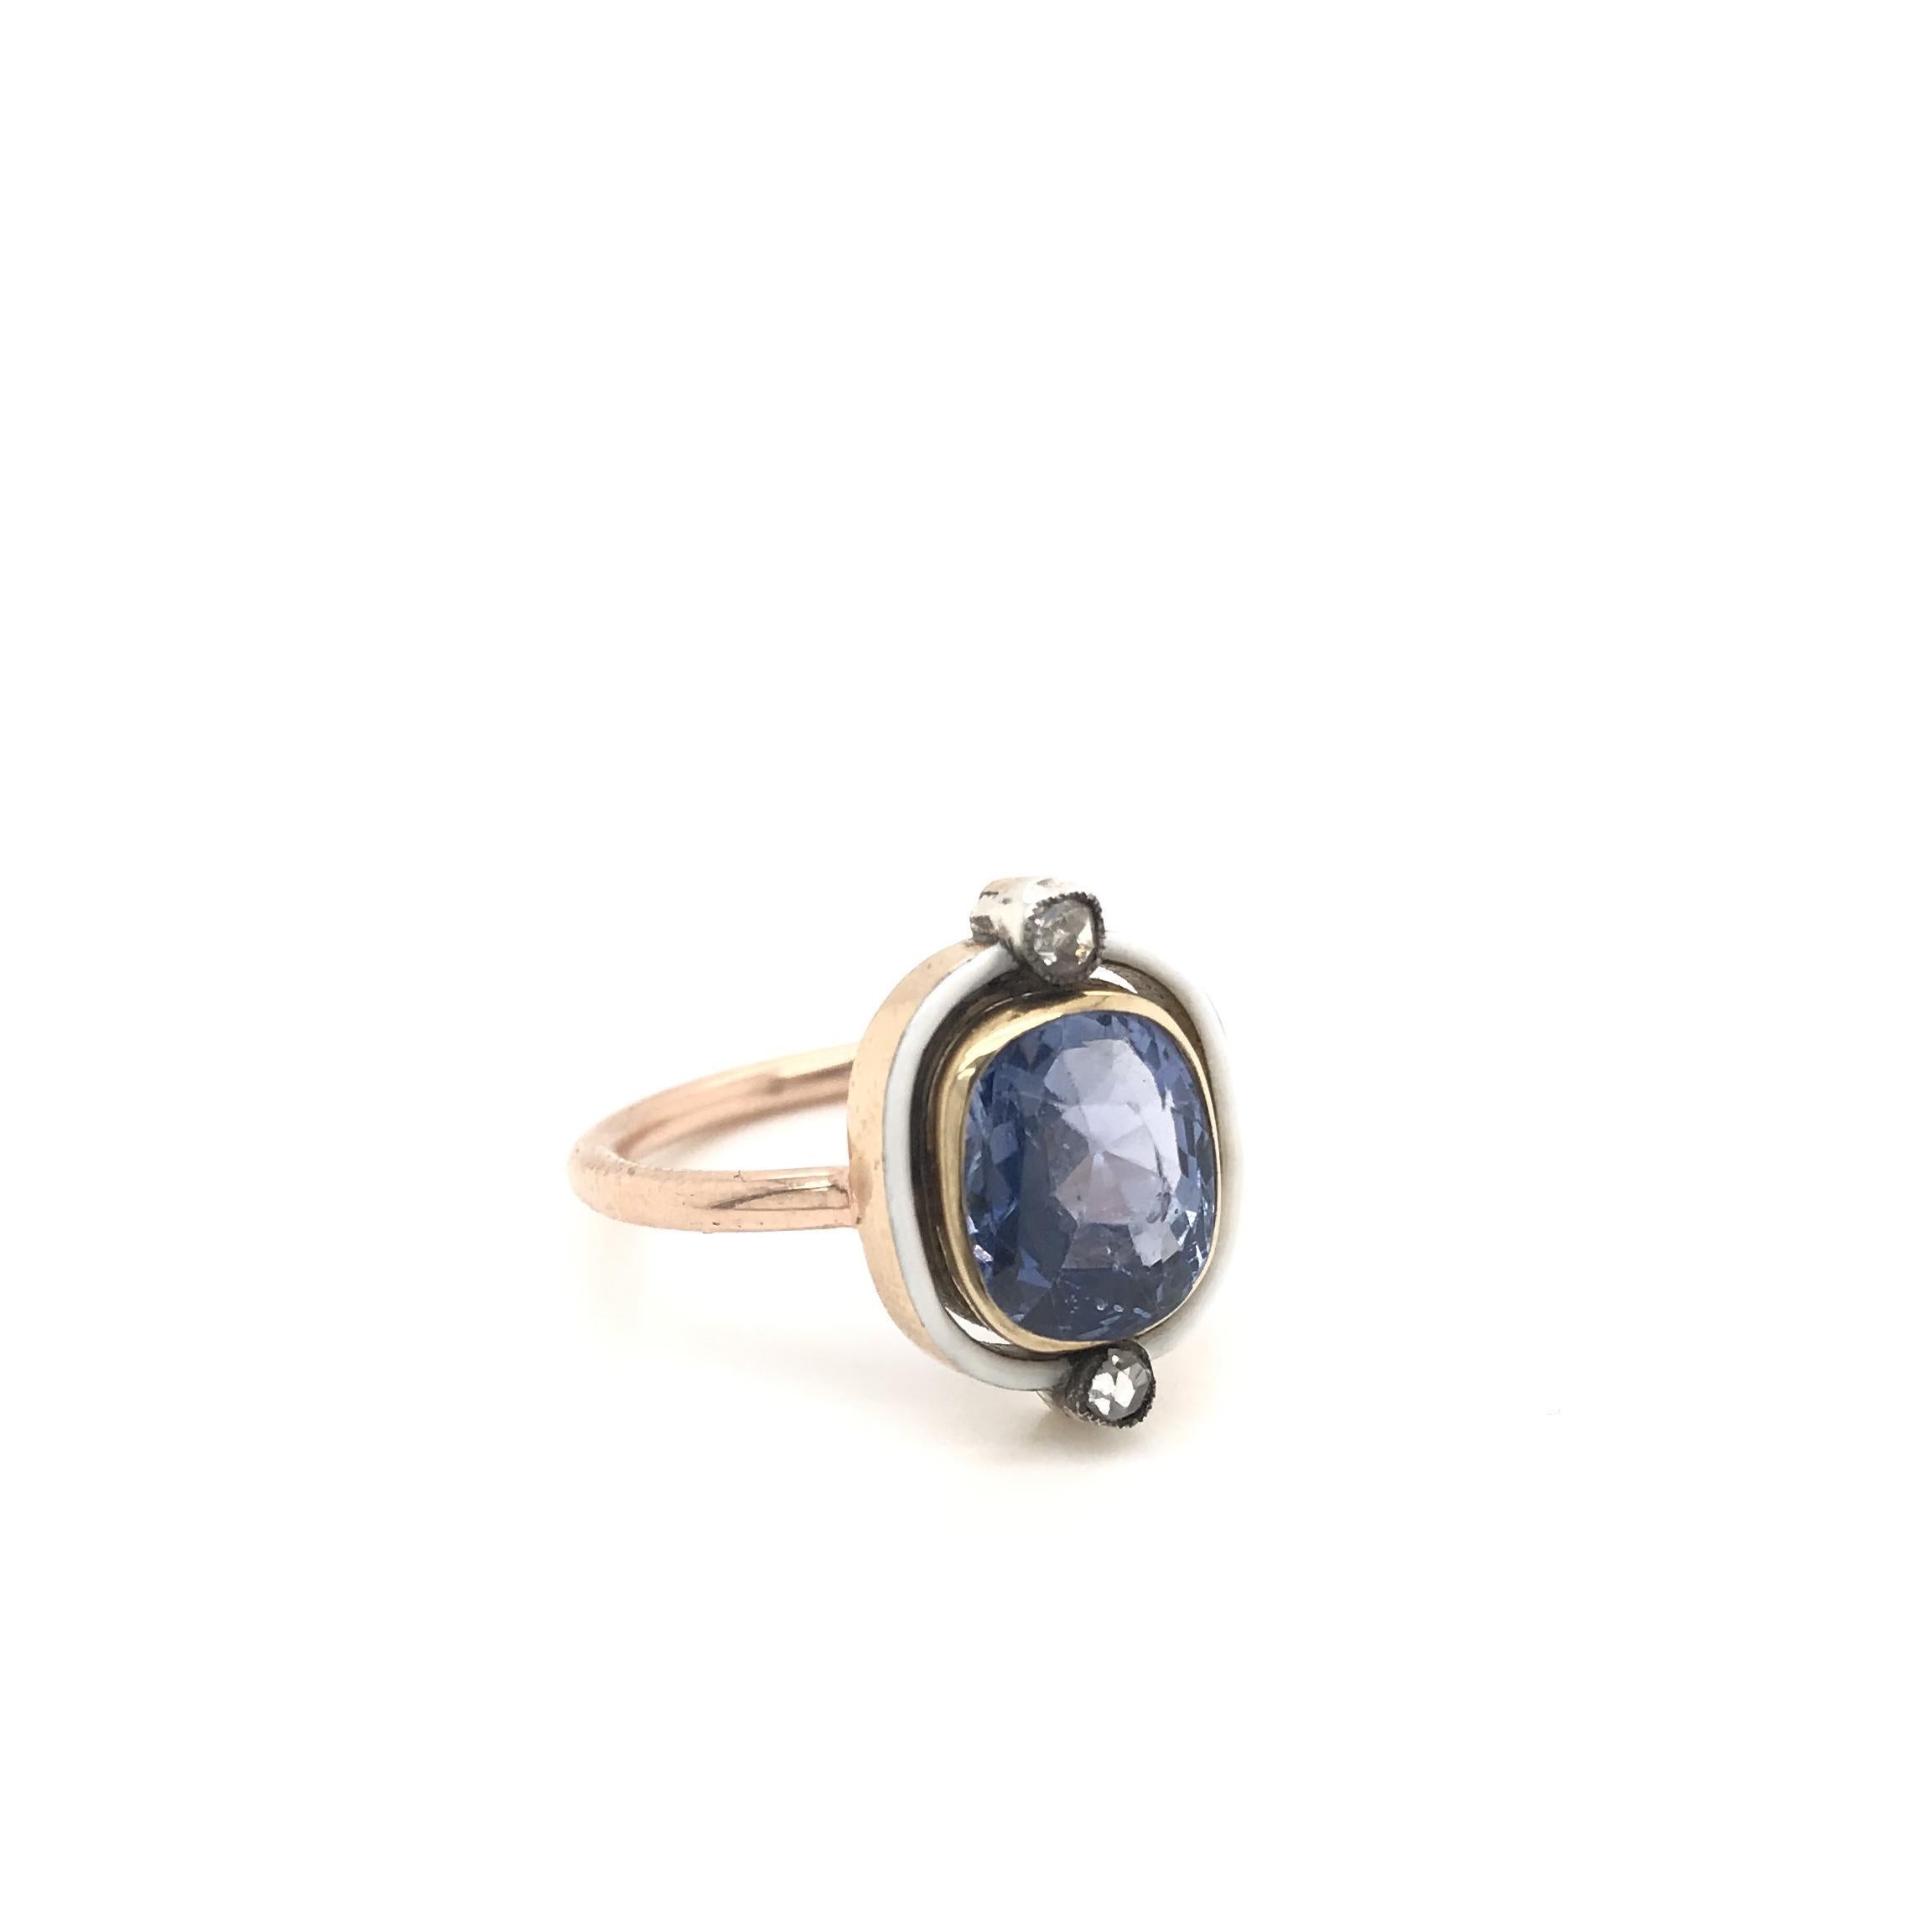 This striking antique piece was crafted sometime during the Art Deco design period (1920-1940). The center stone is a natural blue sapphire measuring approximately 2.50 carats. The sapphire has been certified by The Gemological Institute of America